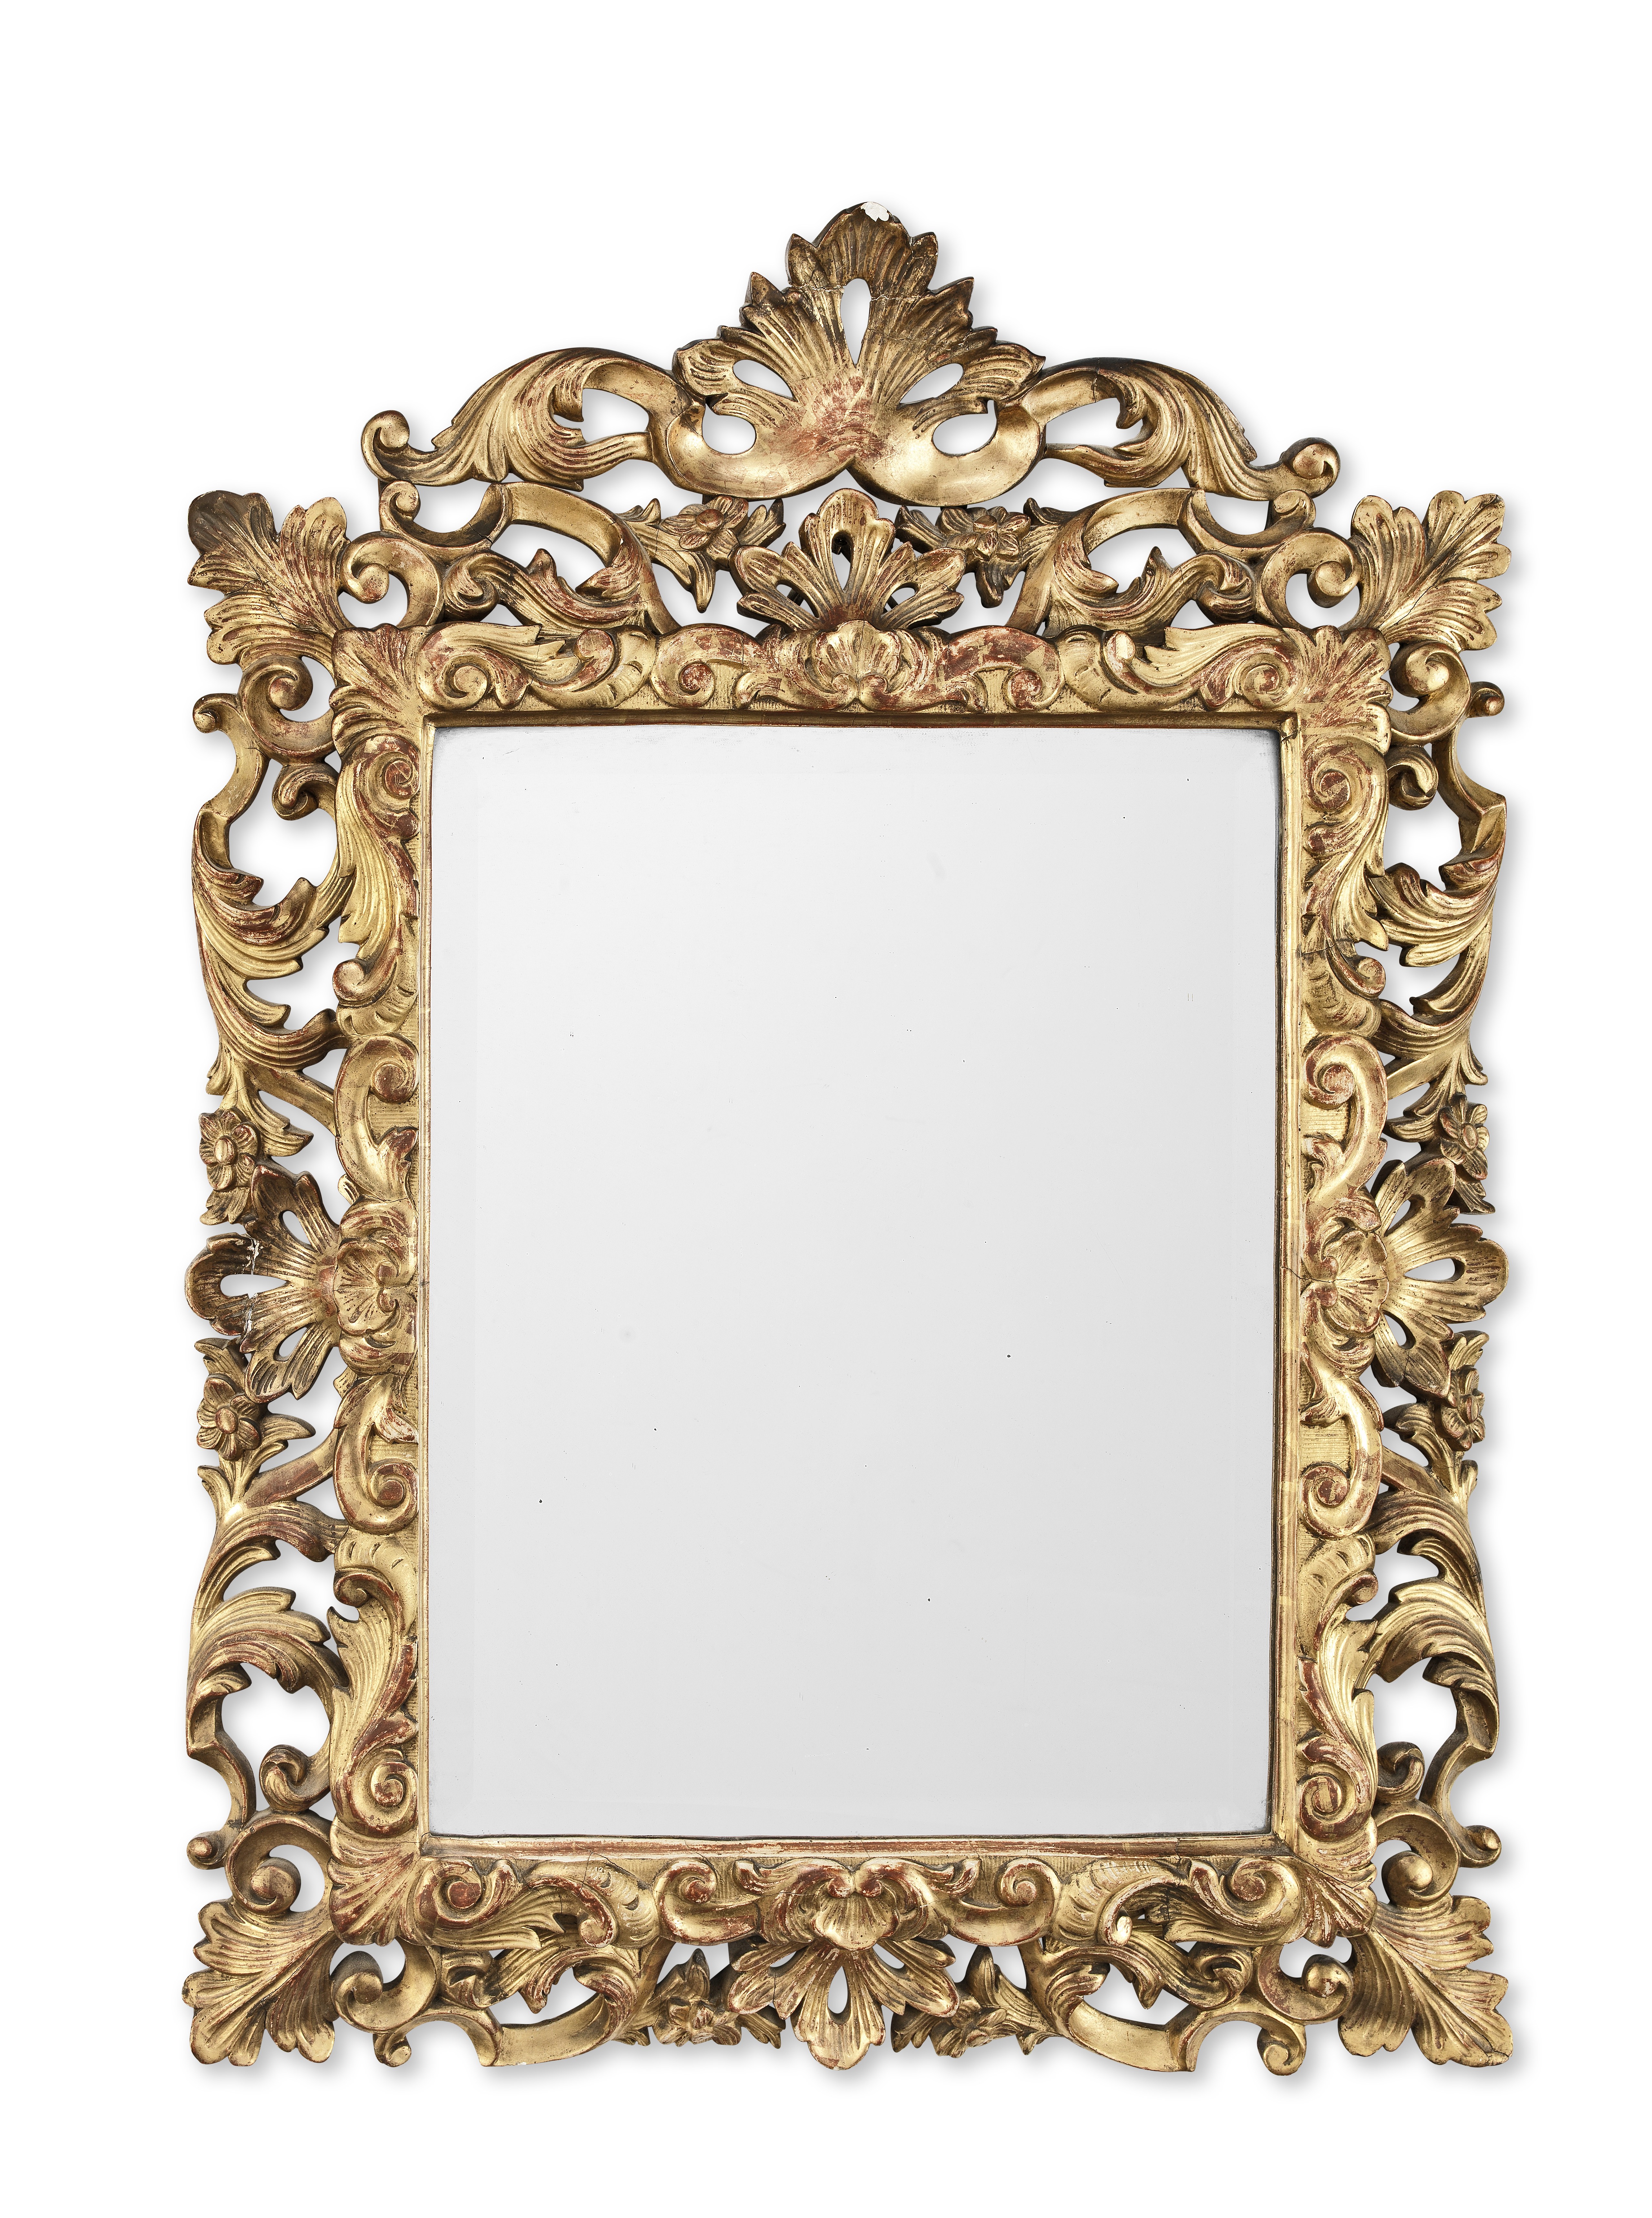 An Italian late 19th century giltwood and gilt composition mirror in the late 17th/early 18th ce...